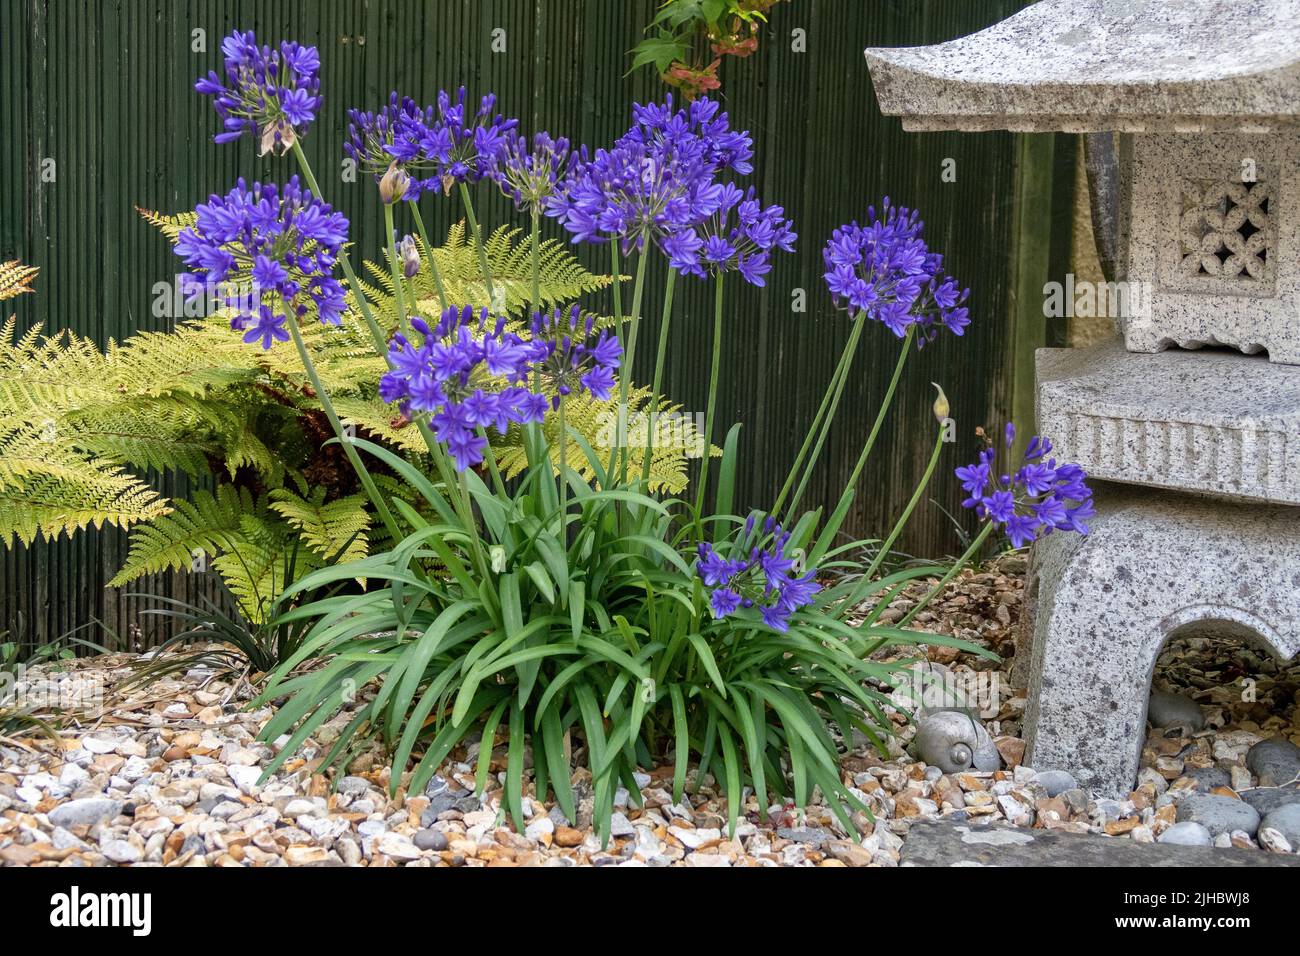 Agapanthus 'Brilliant Blue'  African Lily Stock Photo